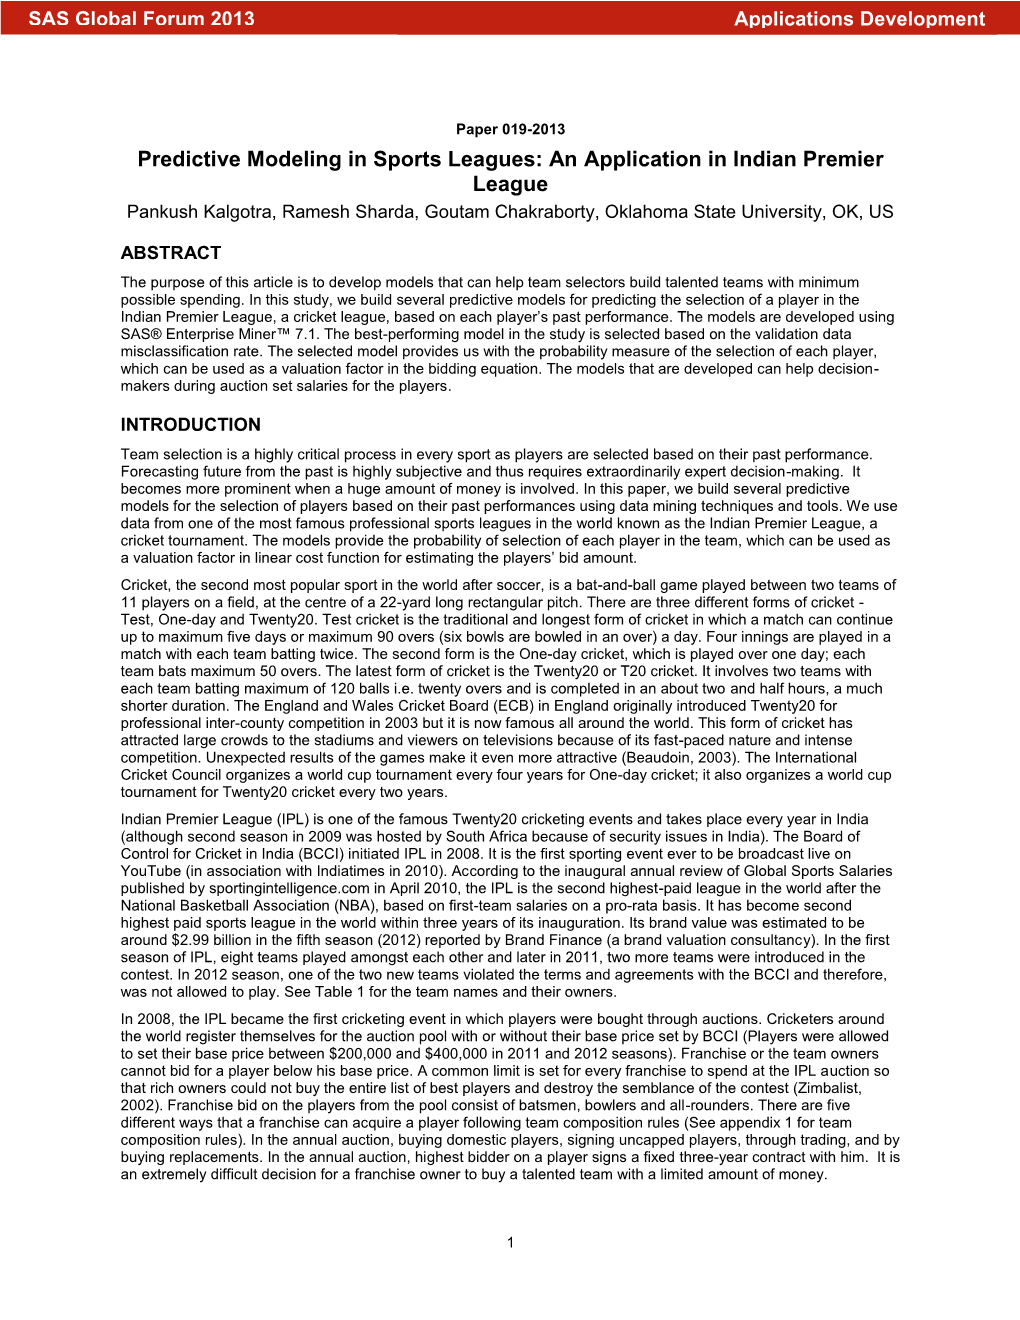 019-2013: Predictive Modeling in Sports Leagues: an Application in the Indian Premier League